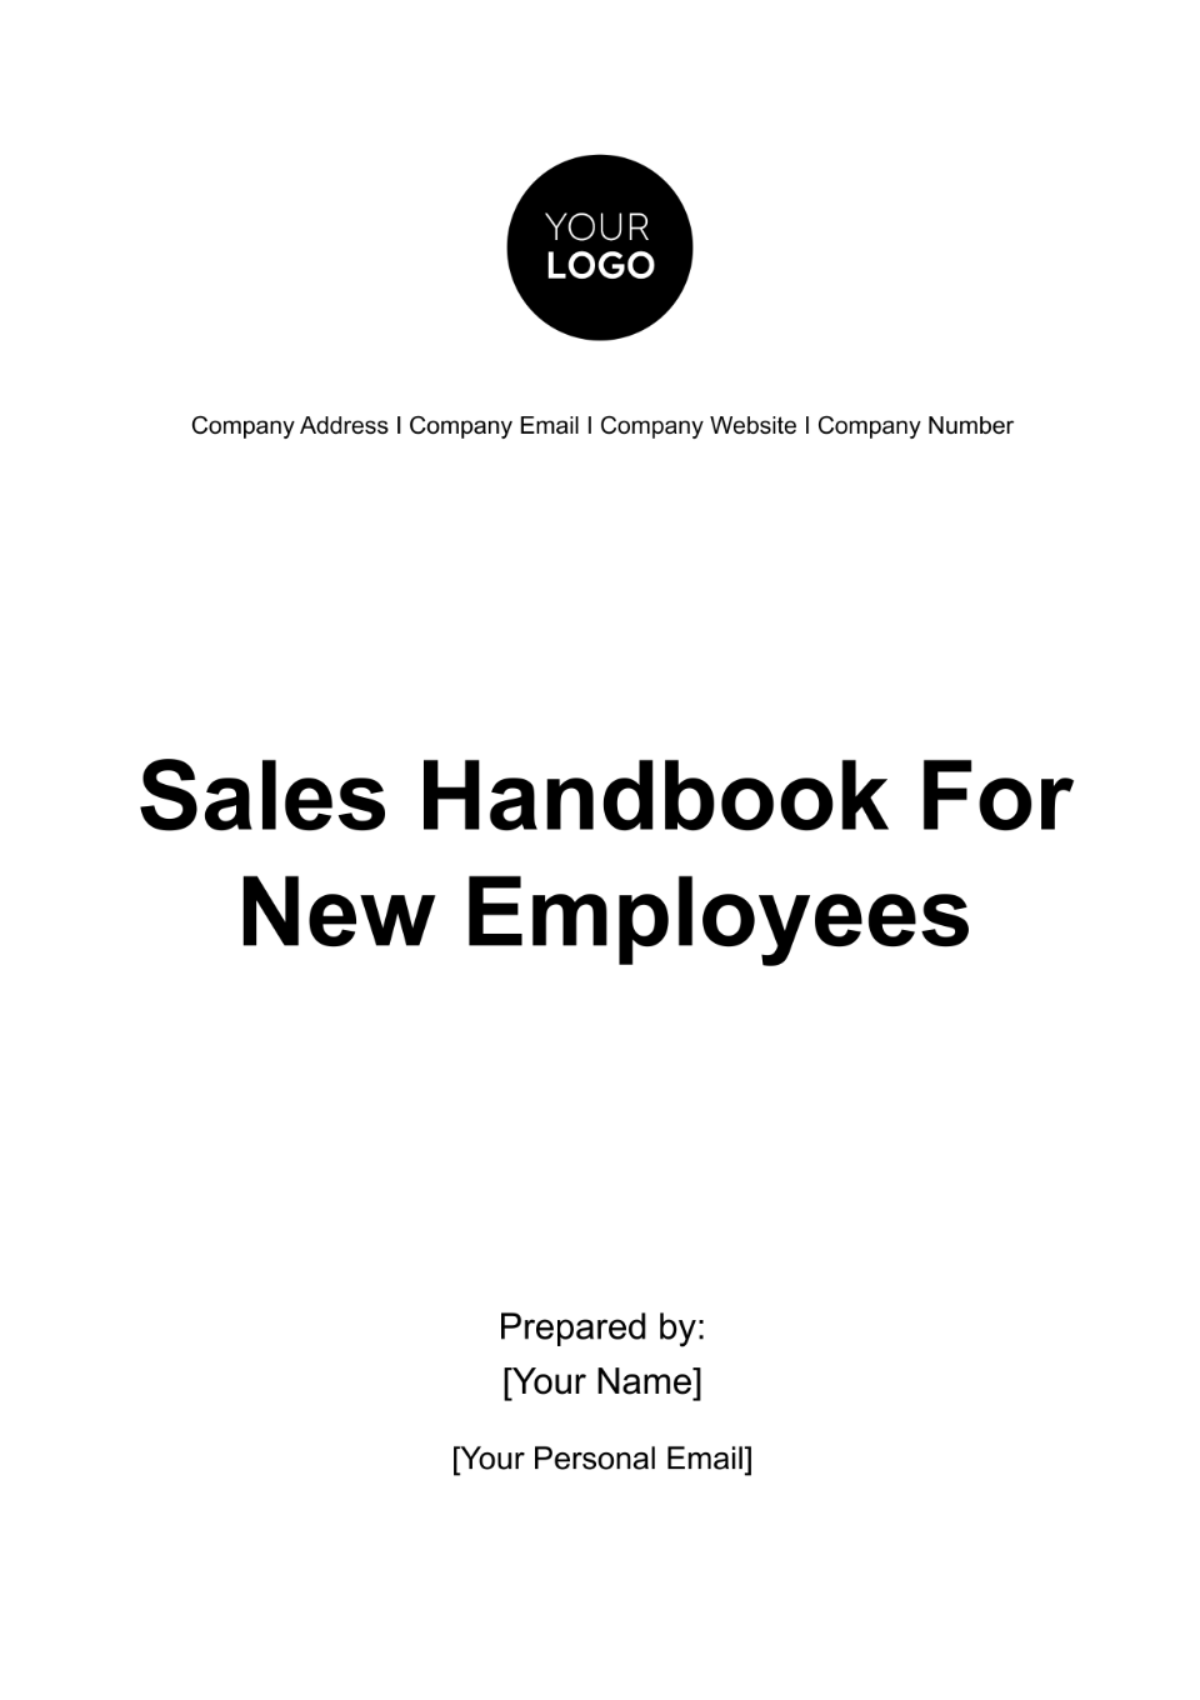 Free Sales Handbook for New Employees Template